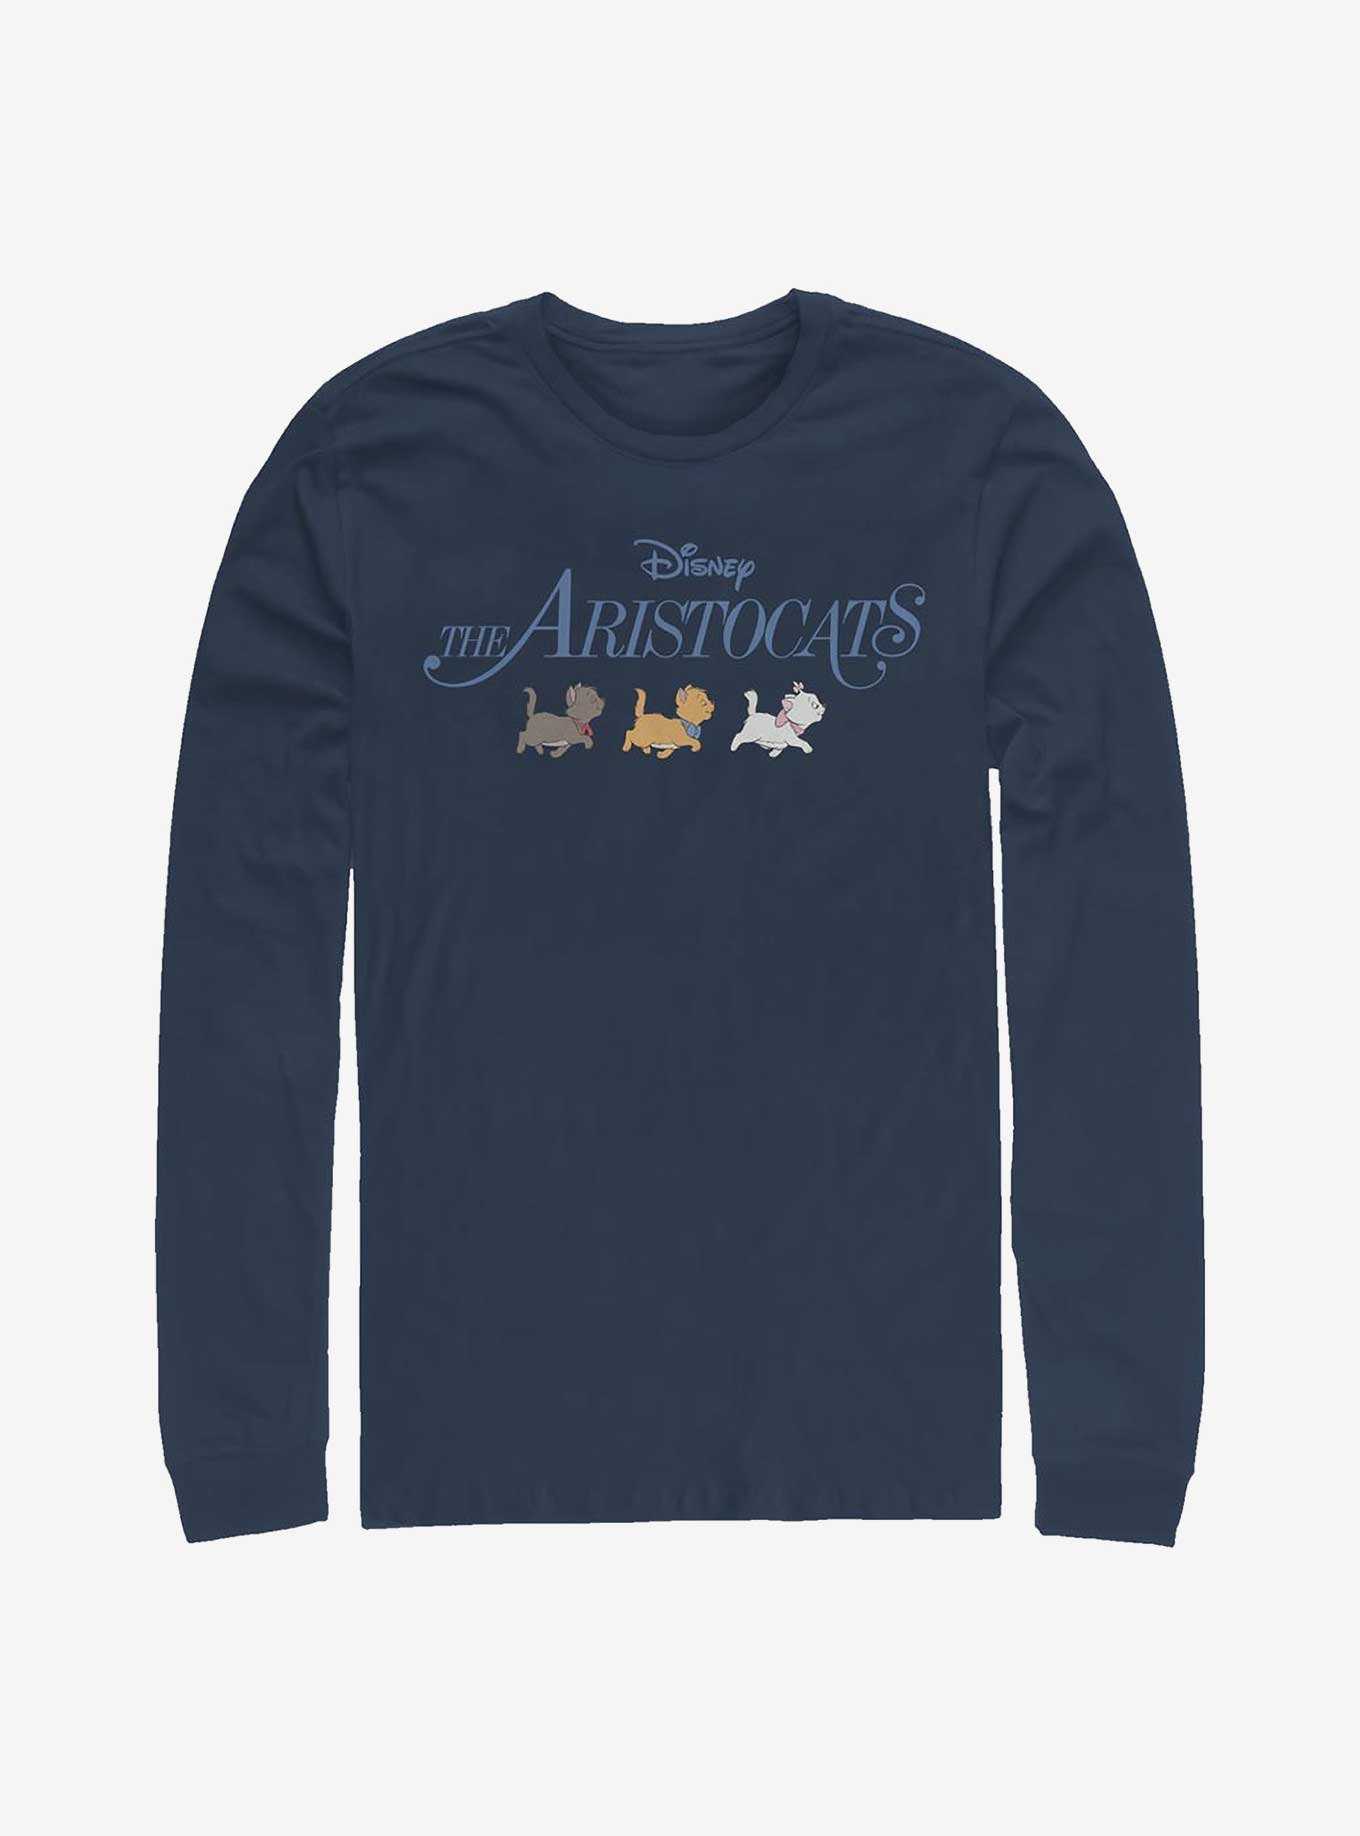 OFFICIAL The Aristocats Shirts, Gifts & Merchandise | Boxlunch